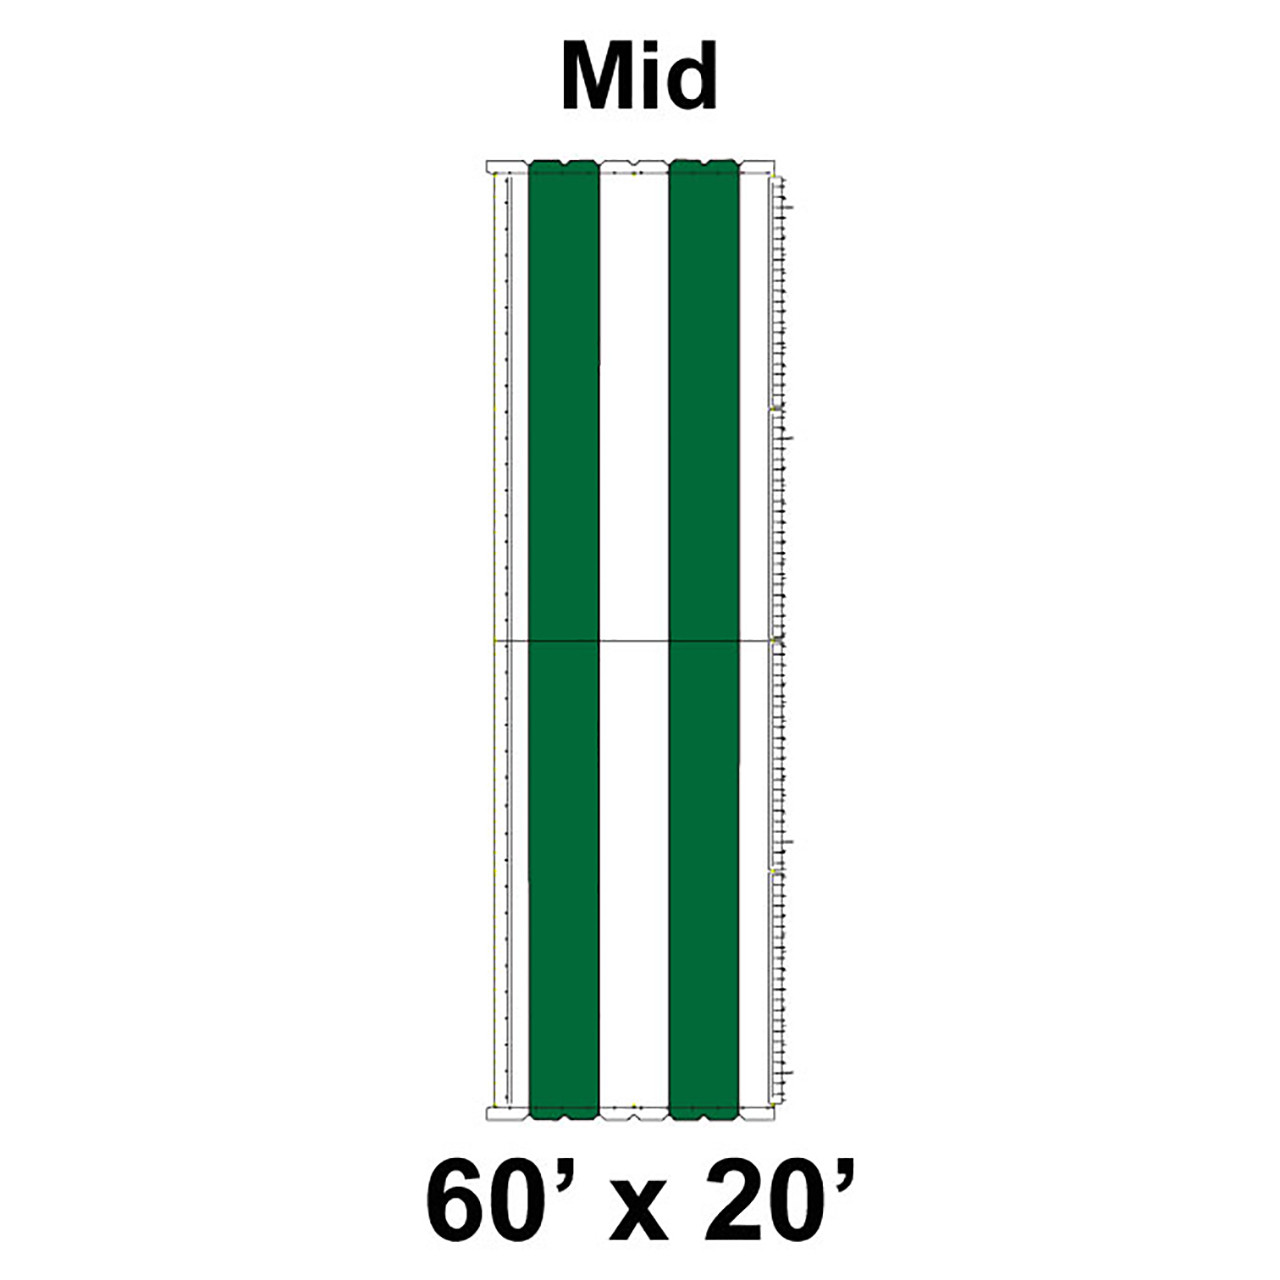 60' x 20' Classic Pole Tent Top, Mid Section